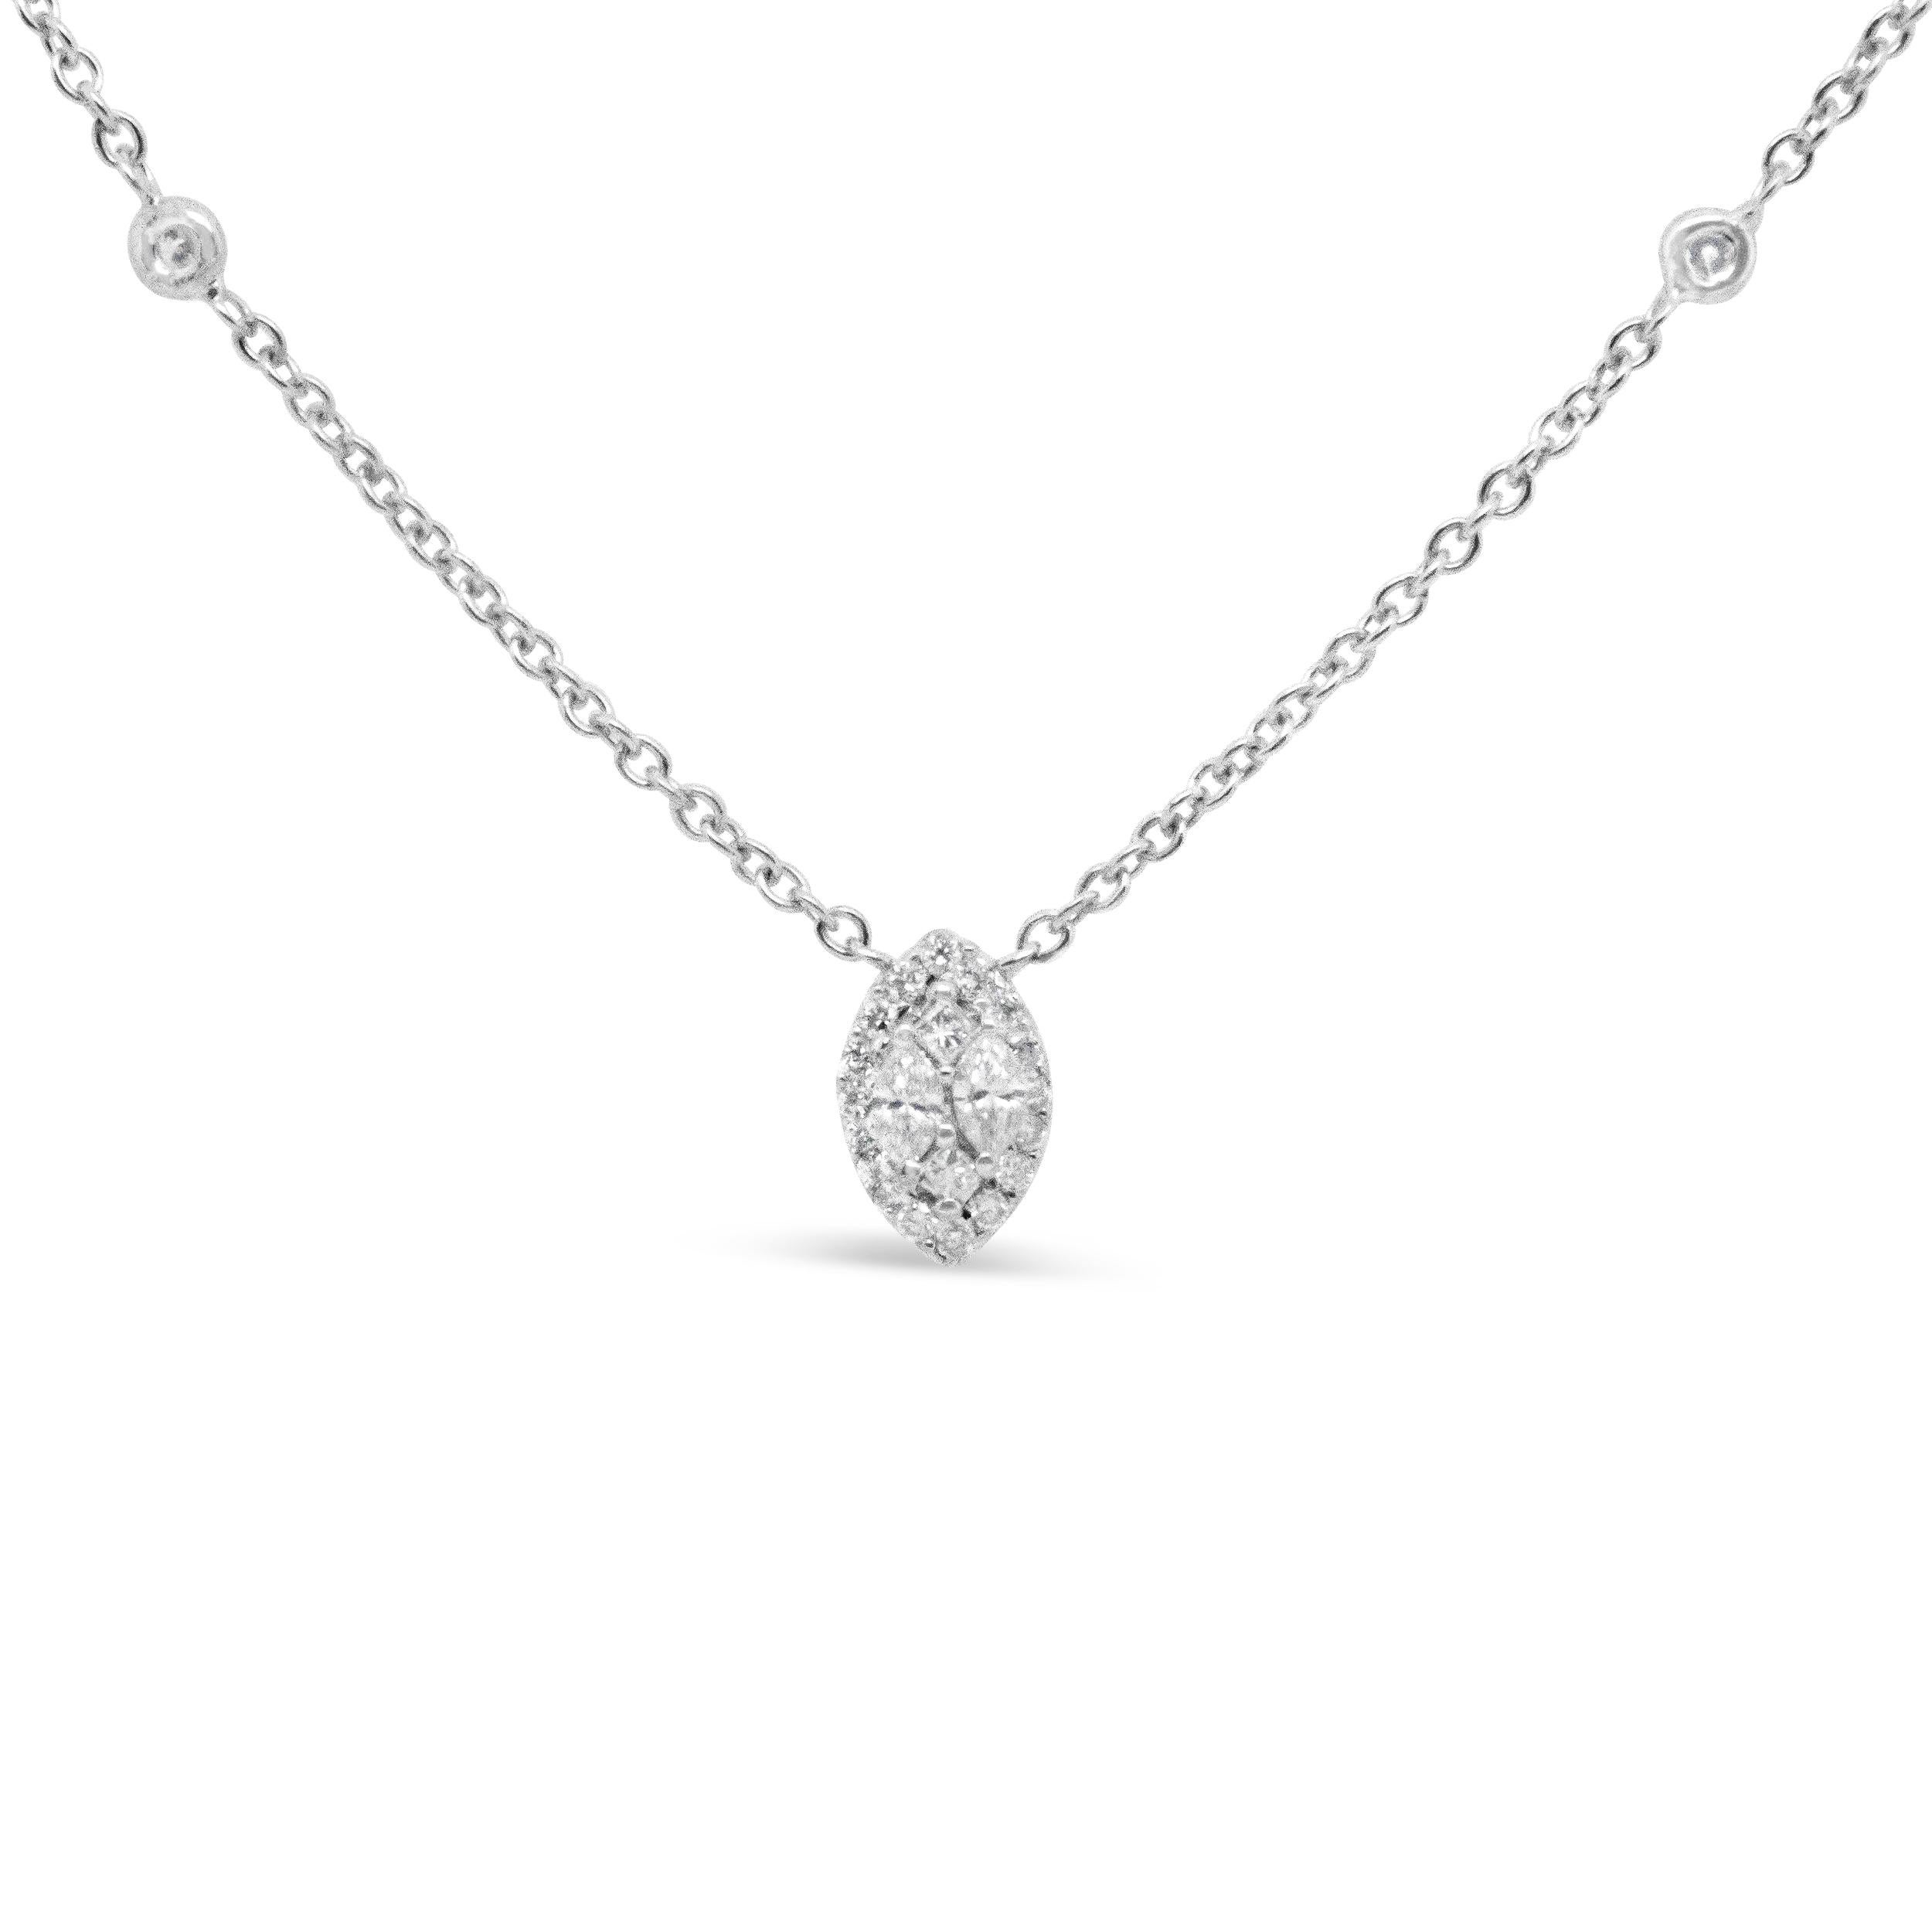 There is an excellent air of sophistication around this gorgeous diamond station necklace crafted from genuine 14k white gold. Interspersed with sparkling bezel-set stones along the sides, the eye-catcher of this spectacular necklace is the dazzling